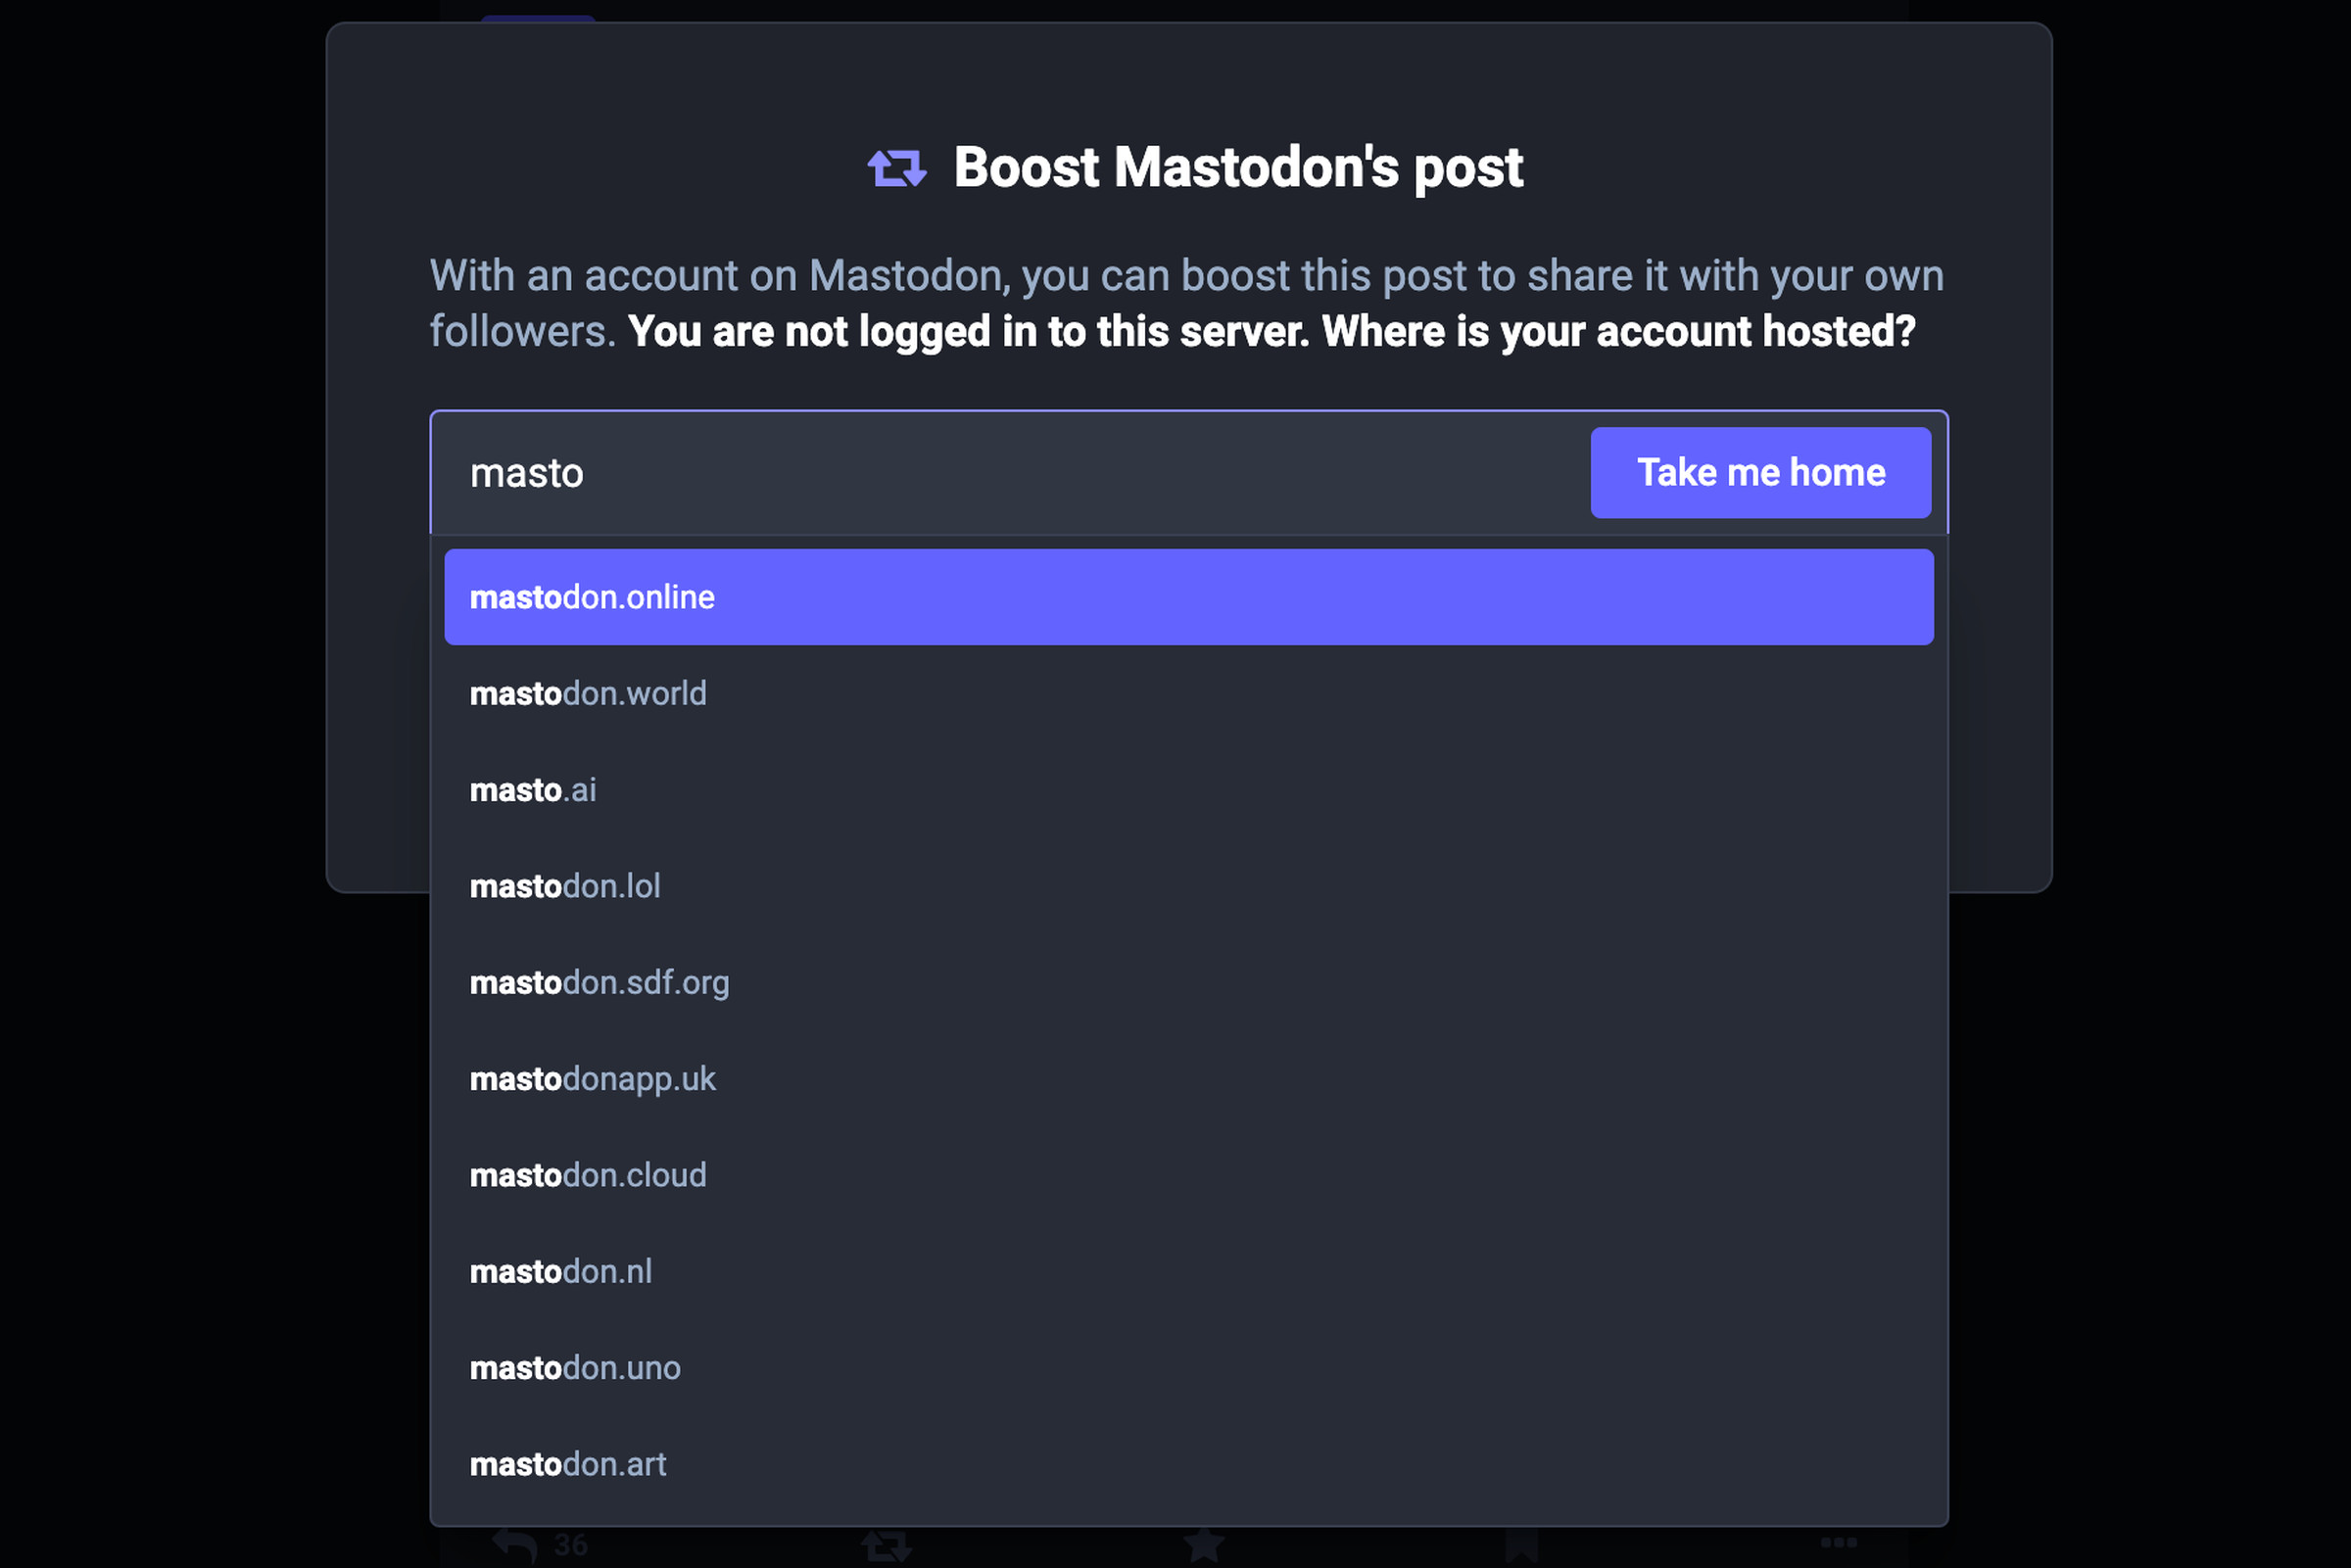 A popup for engaging with a post in a logged-out instance, prompting you to select your instance from a dialog box with autocomplete. The drop-down menu shows a large selection of instances containing the text “masto”